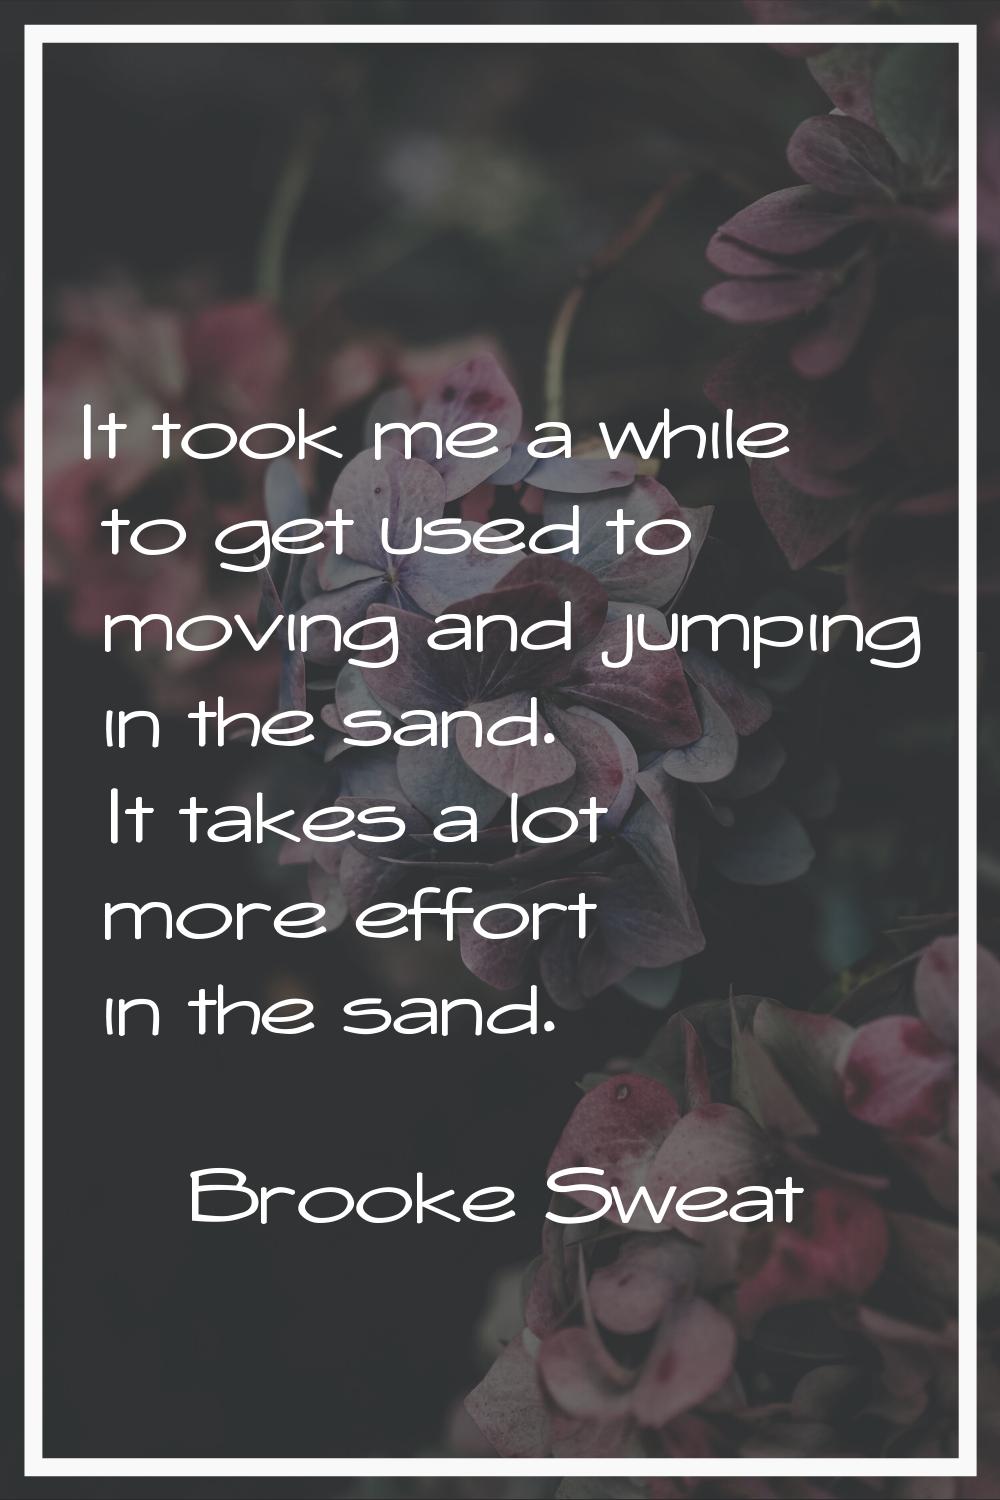 It took me a while to get used to moving and jumping in the sand. It takes a lot more effort in the